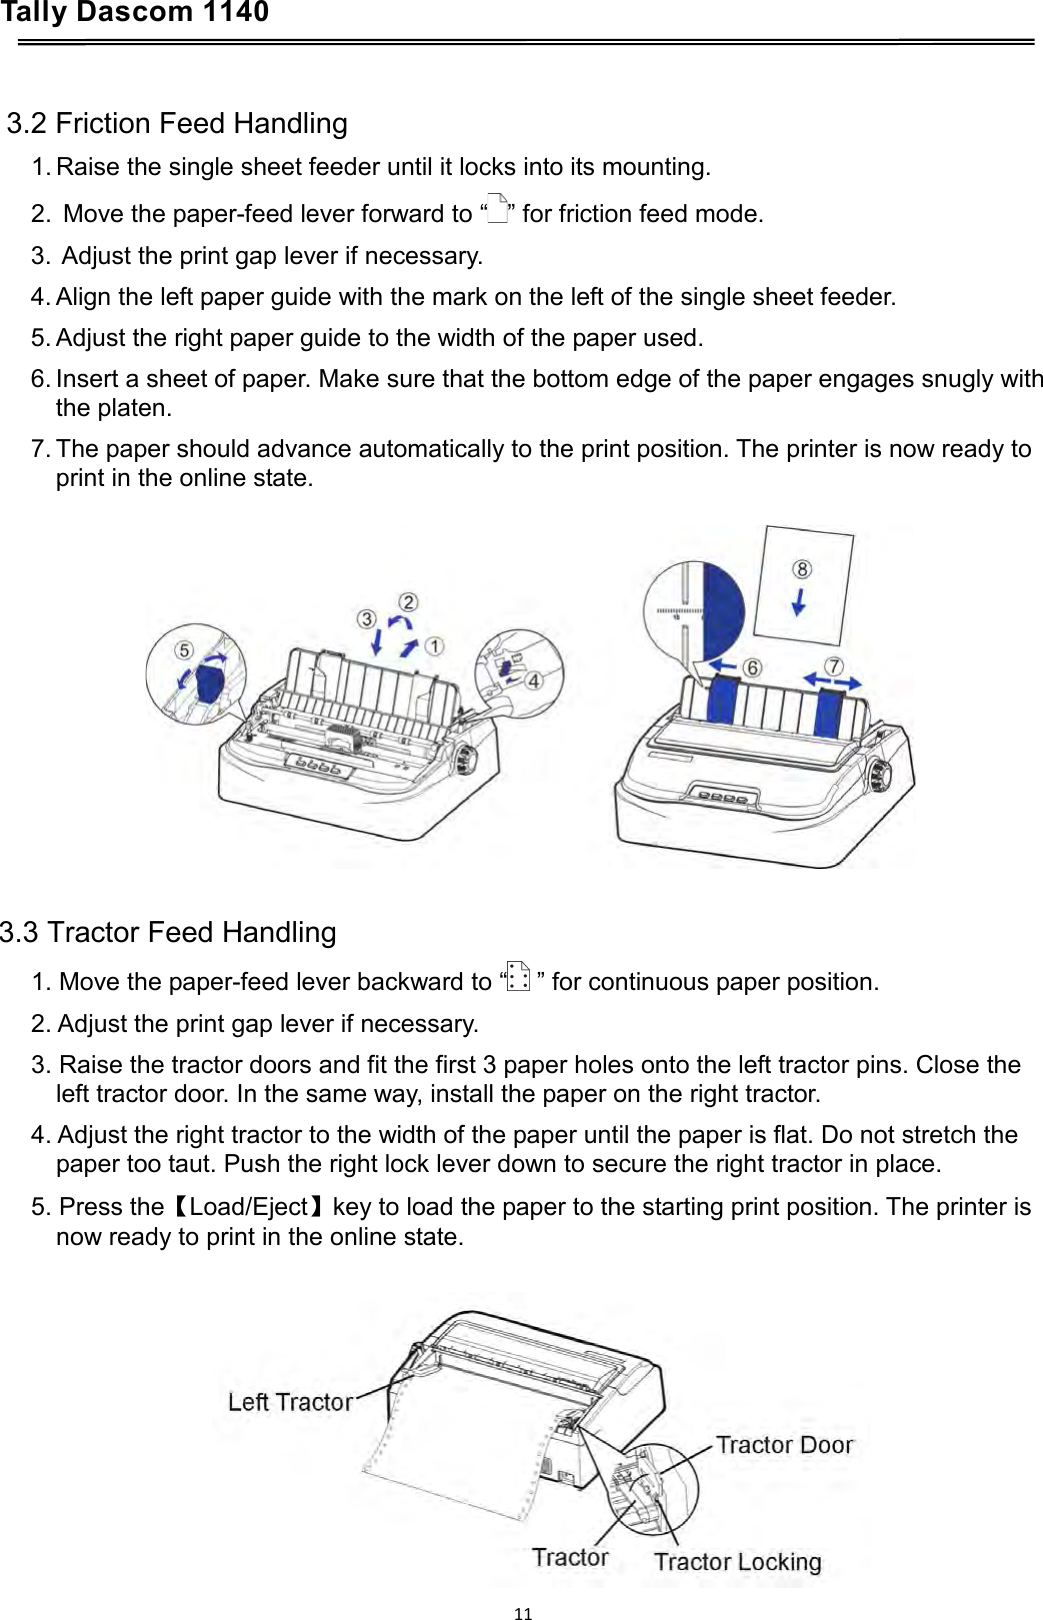 Tally Dascom 1140     3.2 Friction Feed Handling 1. Raise the single sheet feeder until it locks into its mounting. 2.  Move the paper-feed lever forward to “ ” for friction feed mode. 3.  Adjust the print gap lever if necessary. 4. Align the left paper guide with the mark on the left of the single sheet feeder. 5. Adjust the right paper guide to the width of the paper used. 6. Insert a sheet of paper. Make sure that the bottom edge of the paper engages snugly with the platen. 7. The paper should advance automatically to the print position. The printer is now ready to print in the online state.     3.3 Tractor Feed Handling 1. Move the paper-feed lever backward to “  ” for continuous paper position. 2. Adjust the print gap lever if necessary. 3. Raise the tractor doors and fit the first 3 paper holes onto the left tractor pins. Close the left tractor door. In the same way, install the paper on the right tractor. 4. Adjust the right tractor to the width of the paper until the paper is flat. Do not stretch the paper too taut. Push the right lock lever down to secure the right tractor in place. 5. Press the【Load/Eject】key to load the paper to the starting print position. The printer is now ready to print in the online state.   11  